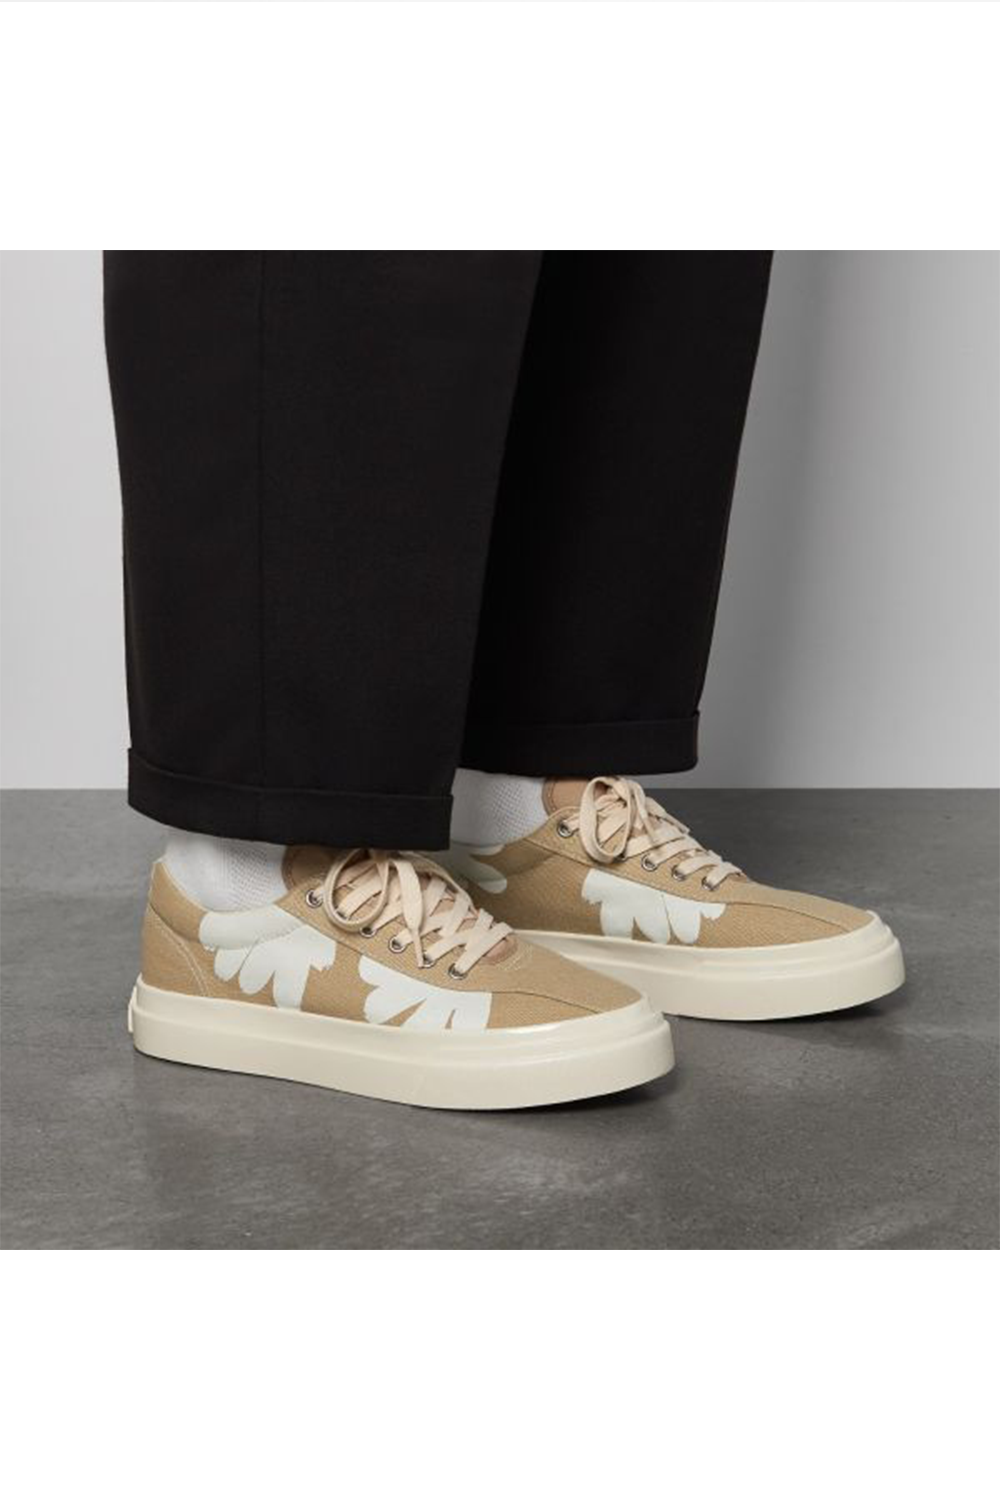 DELLOW SHROOM HANDS SAND-WHITE | Sneakers NZ | STEPNEY WORKERS CLUB NZ | Black Box Boutique Auckland | Womens Fashion NZ